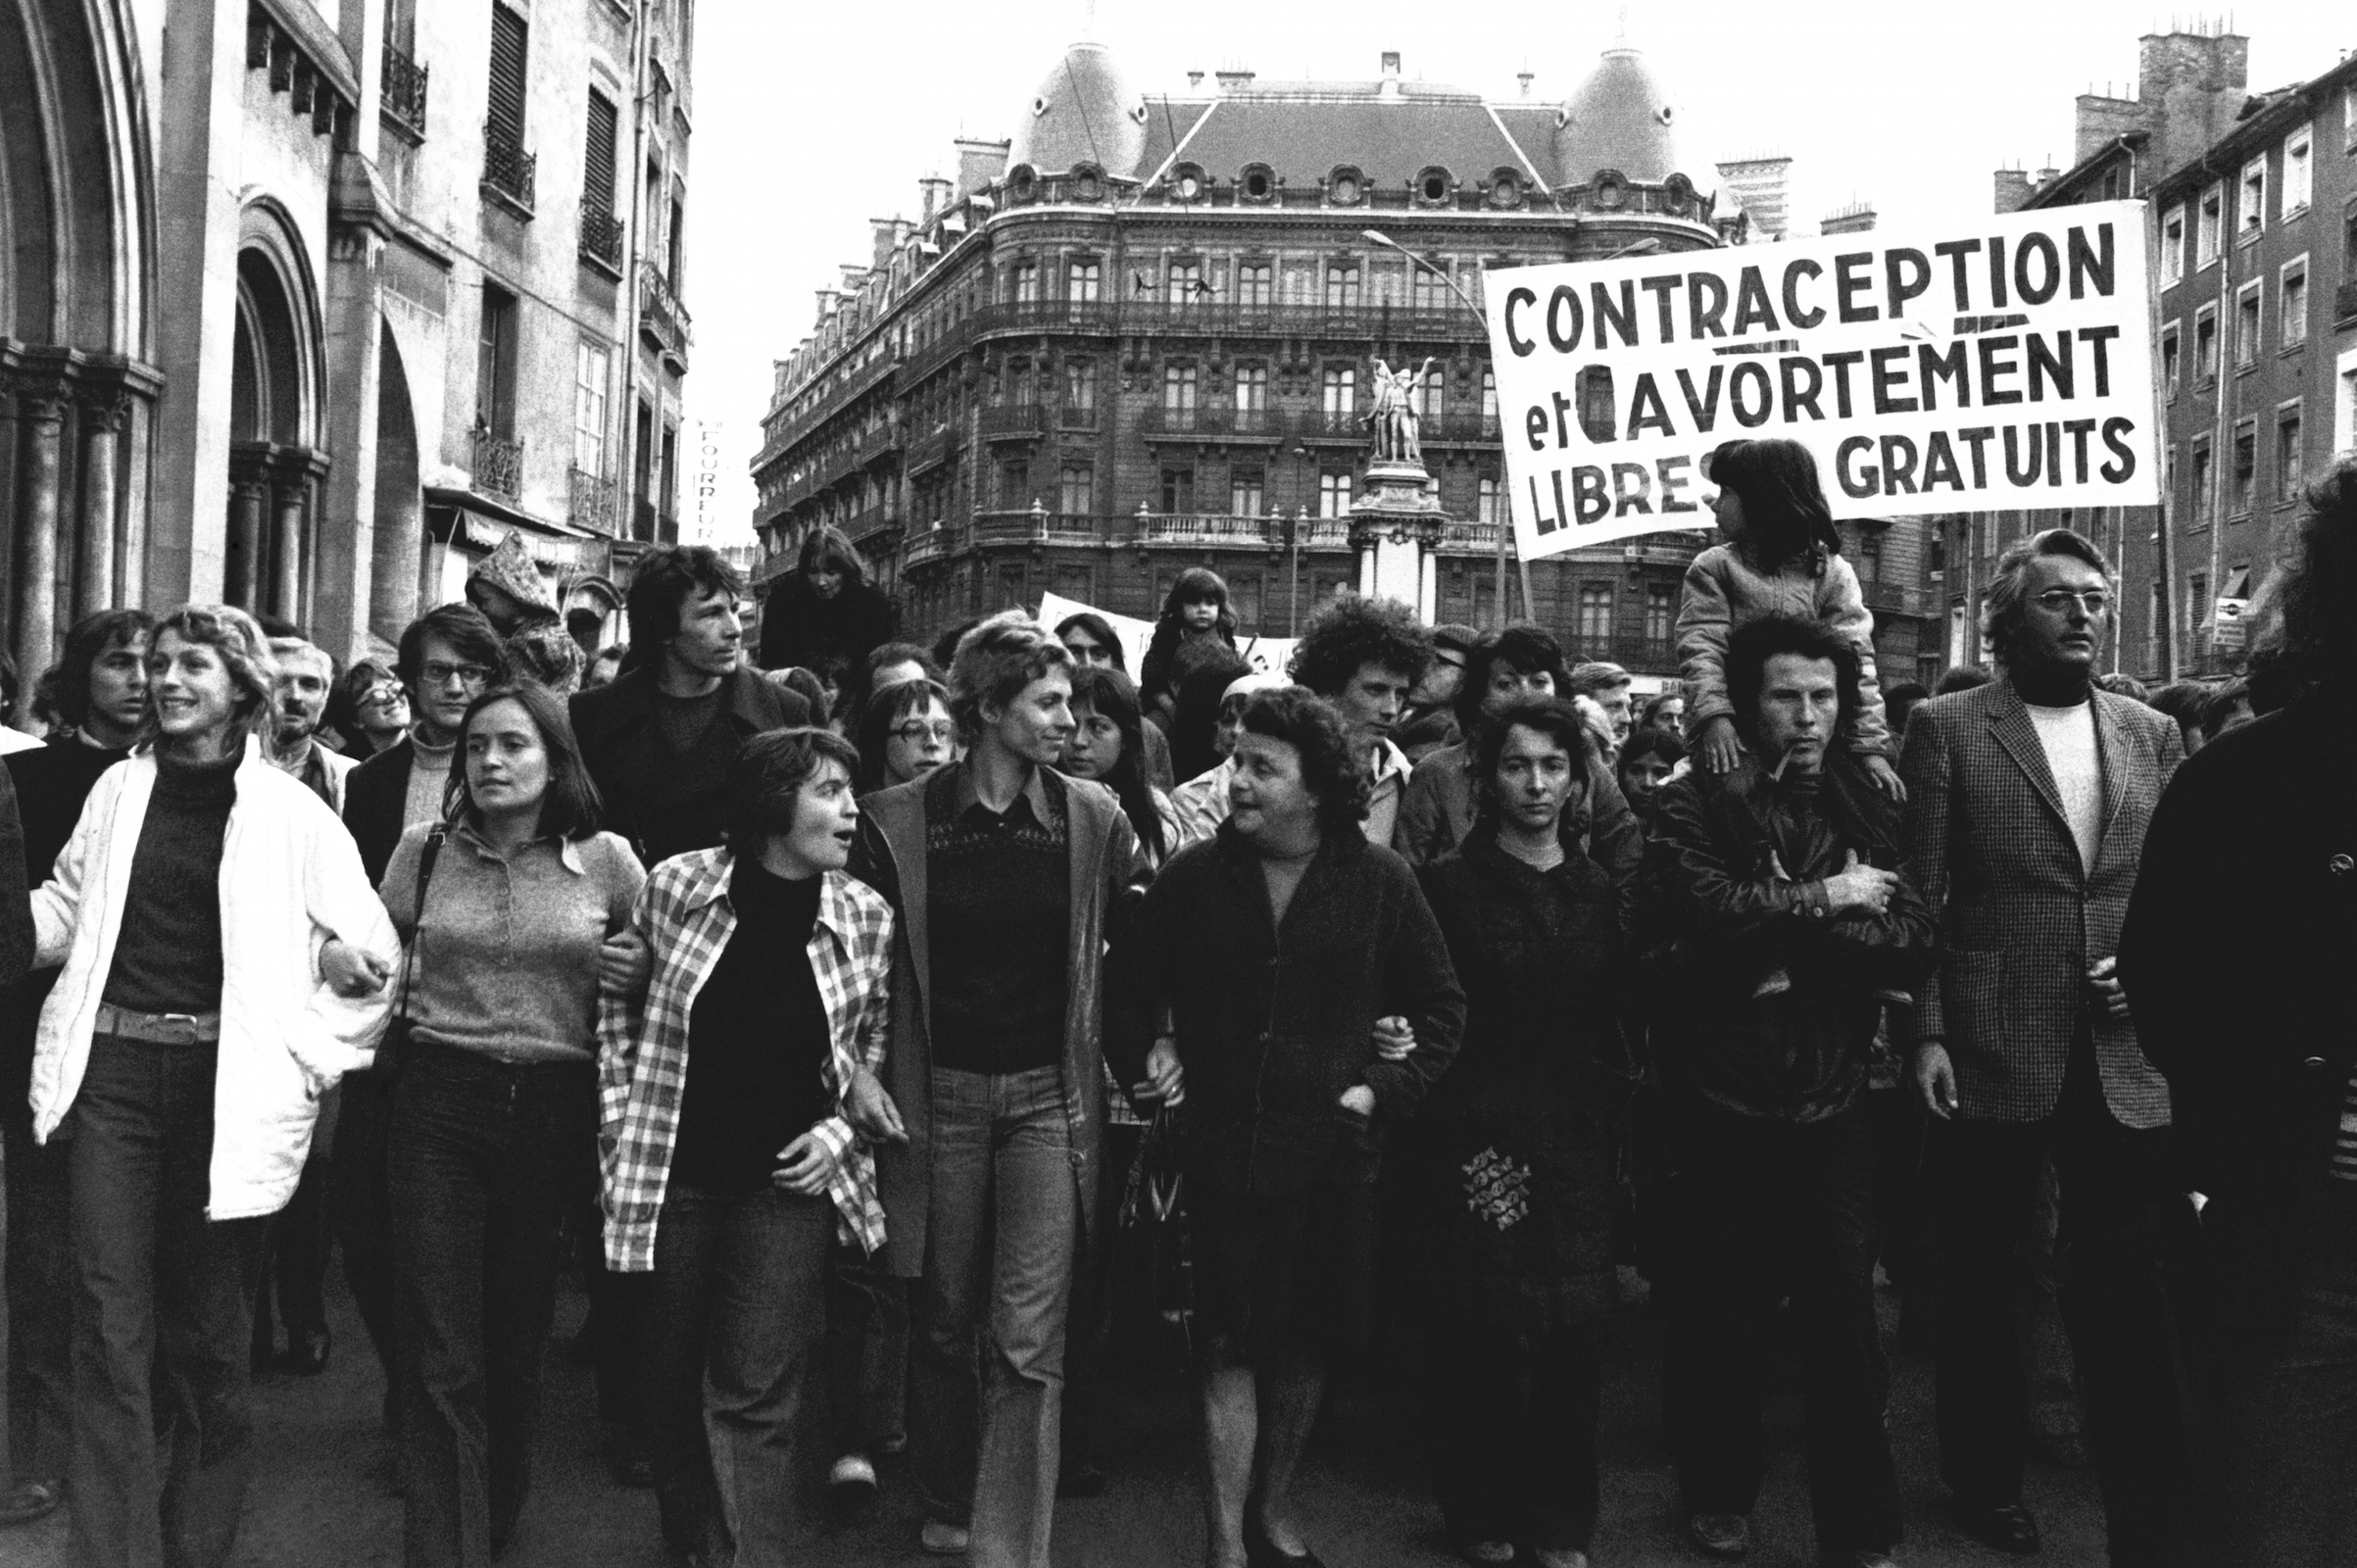 An abortion-rights protest in Grenoble, France, on May 11, 1973. (Michel Causse—Gamma-Rapho / Getty Images)